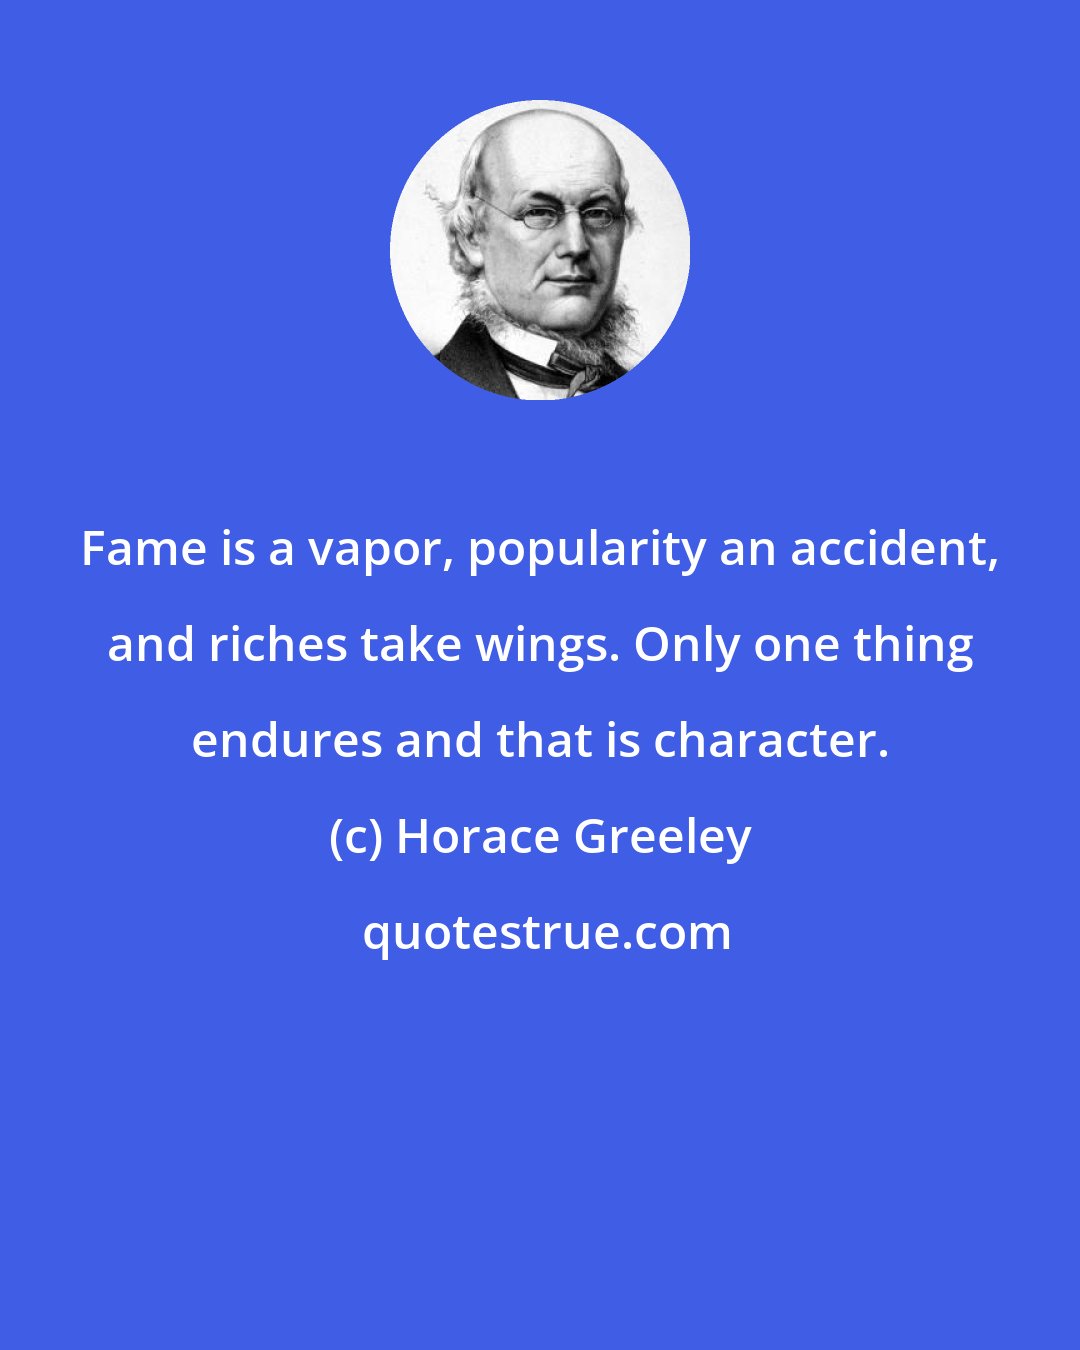 Horace Greeley: Fame is a vapor, popularity an accident, and riches take wings. Only one thing endures and that is character.